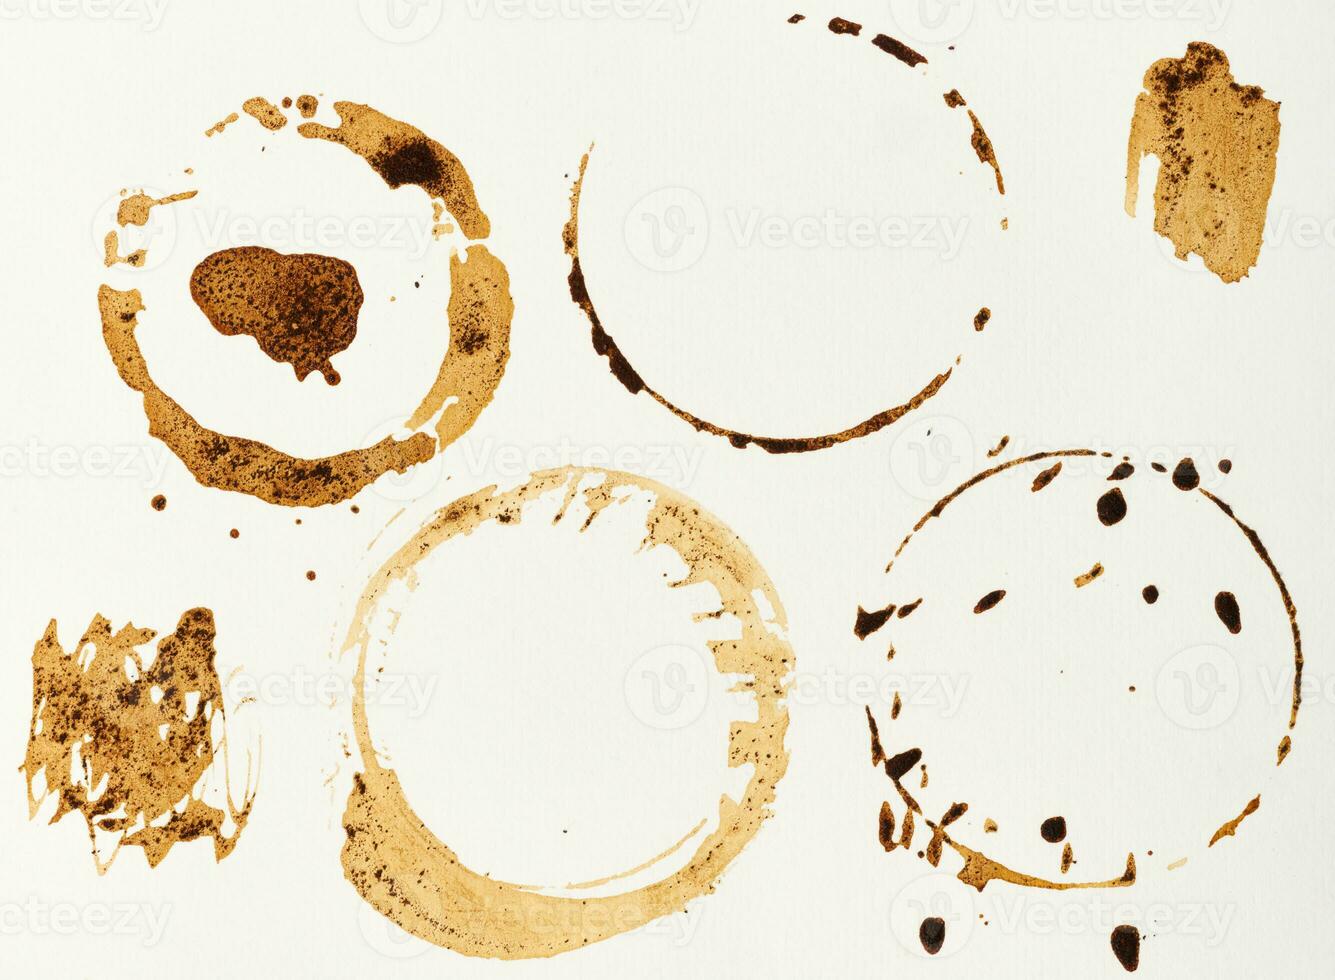 Imprint of spilled black coffee on a white isolated background photo